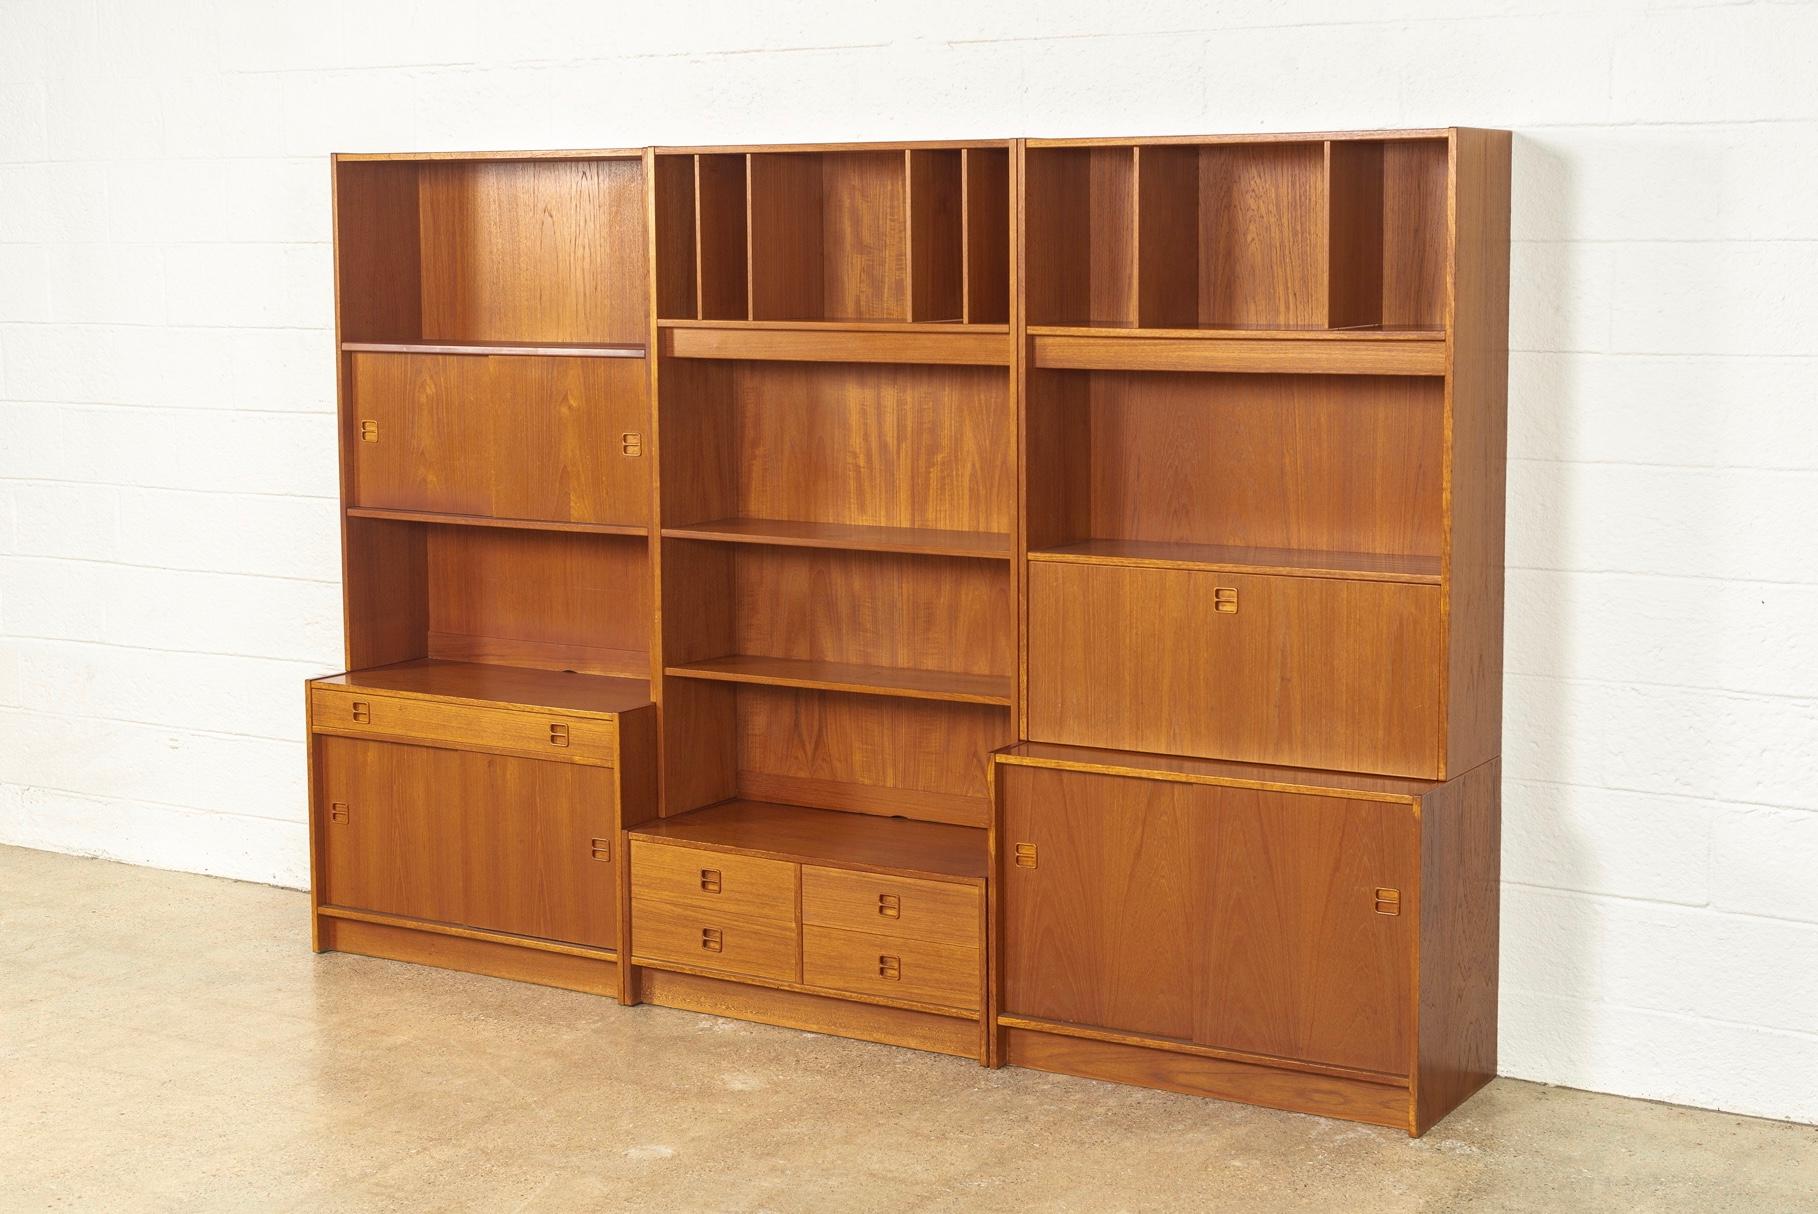 This vintage midcentury Danish modern teak bookcase shelving system is comprised of three units and was made in Denmark, circa 1970. The Classic Danish modern design has clean, Minimalist lines and is well-crafted from teak. Highly versatile and